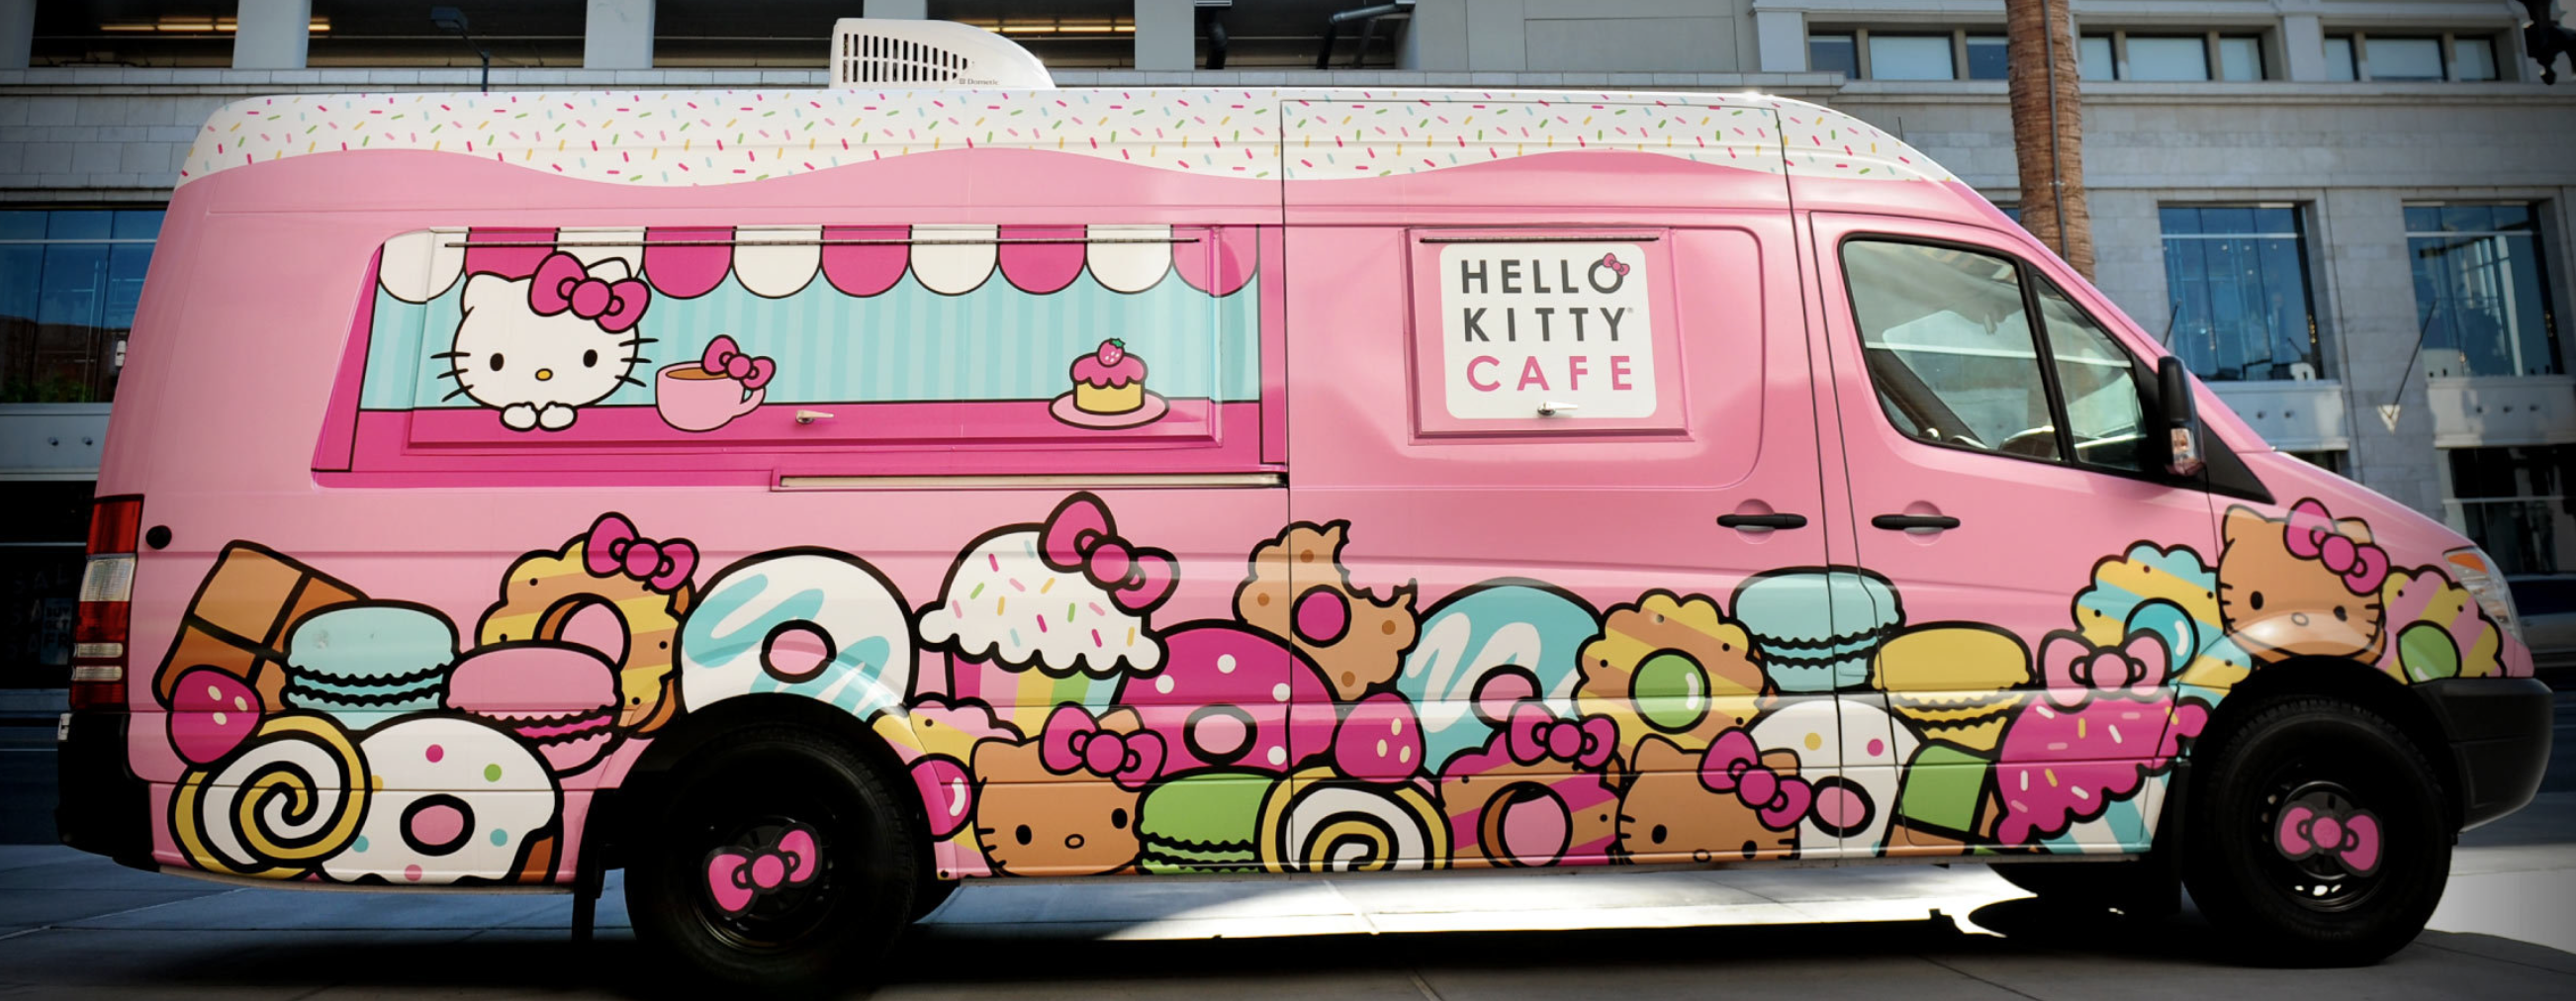 Hello Kitty Café Truck coming to NE Ohio for one day 